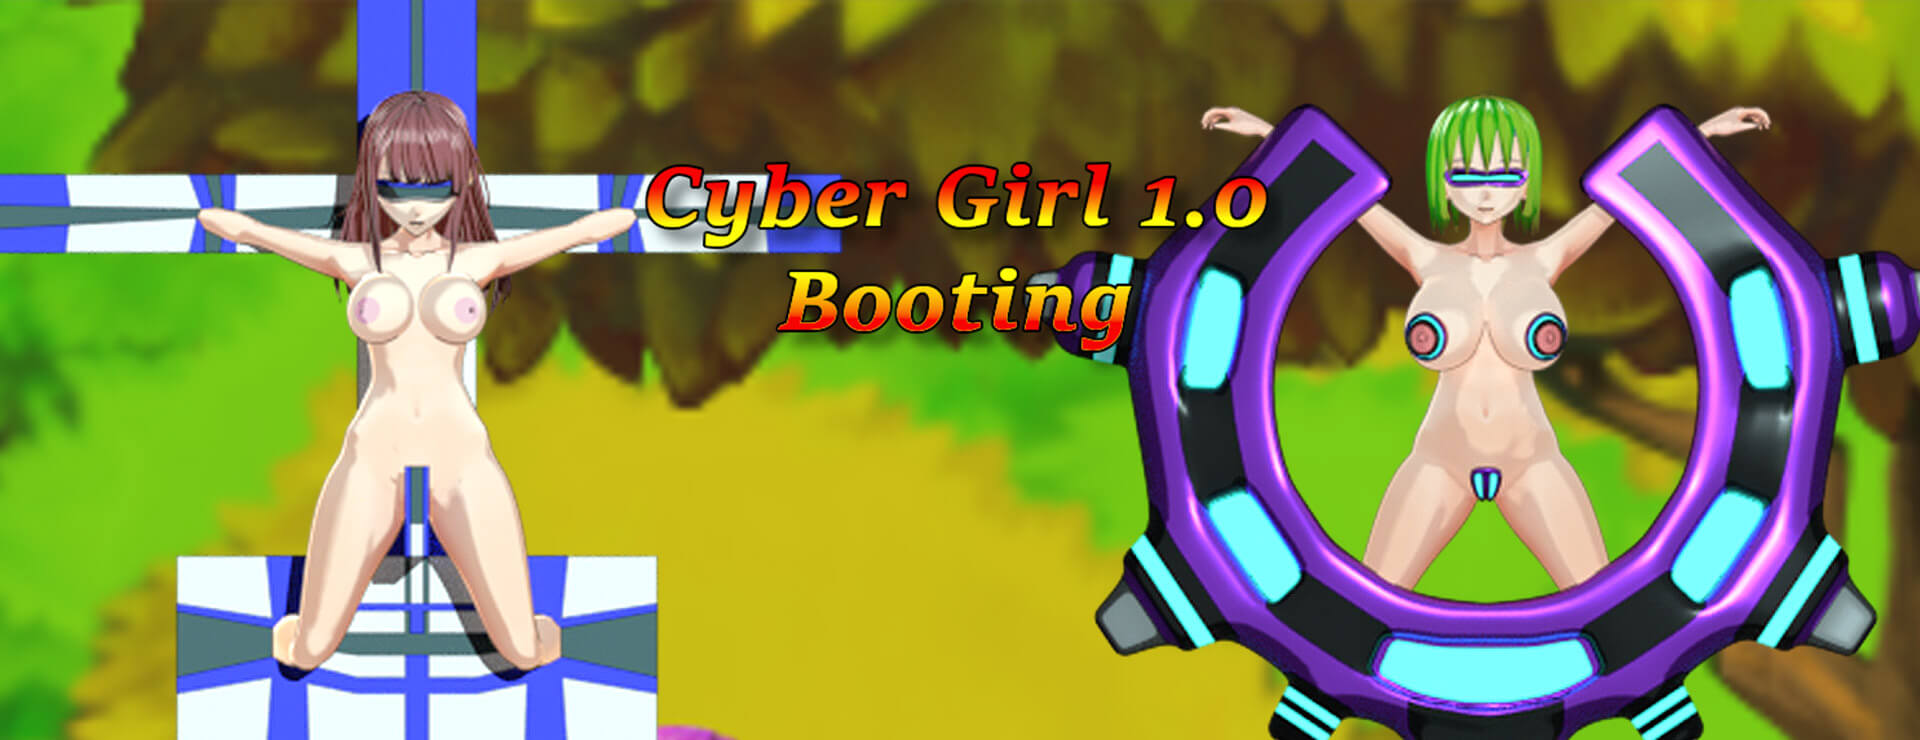 Cyber Girl 1.0: Booting - Action Adventure Game